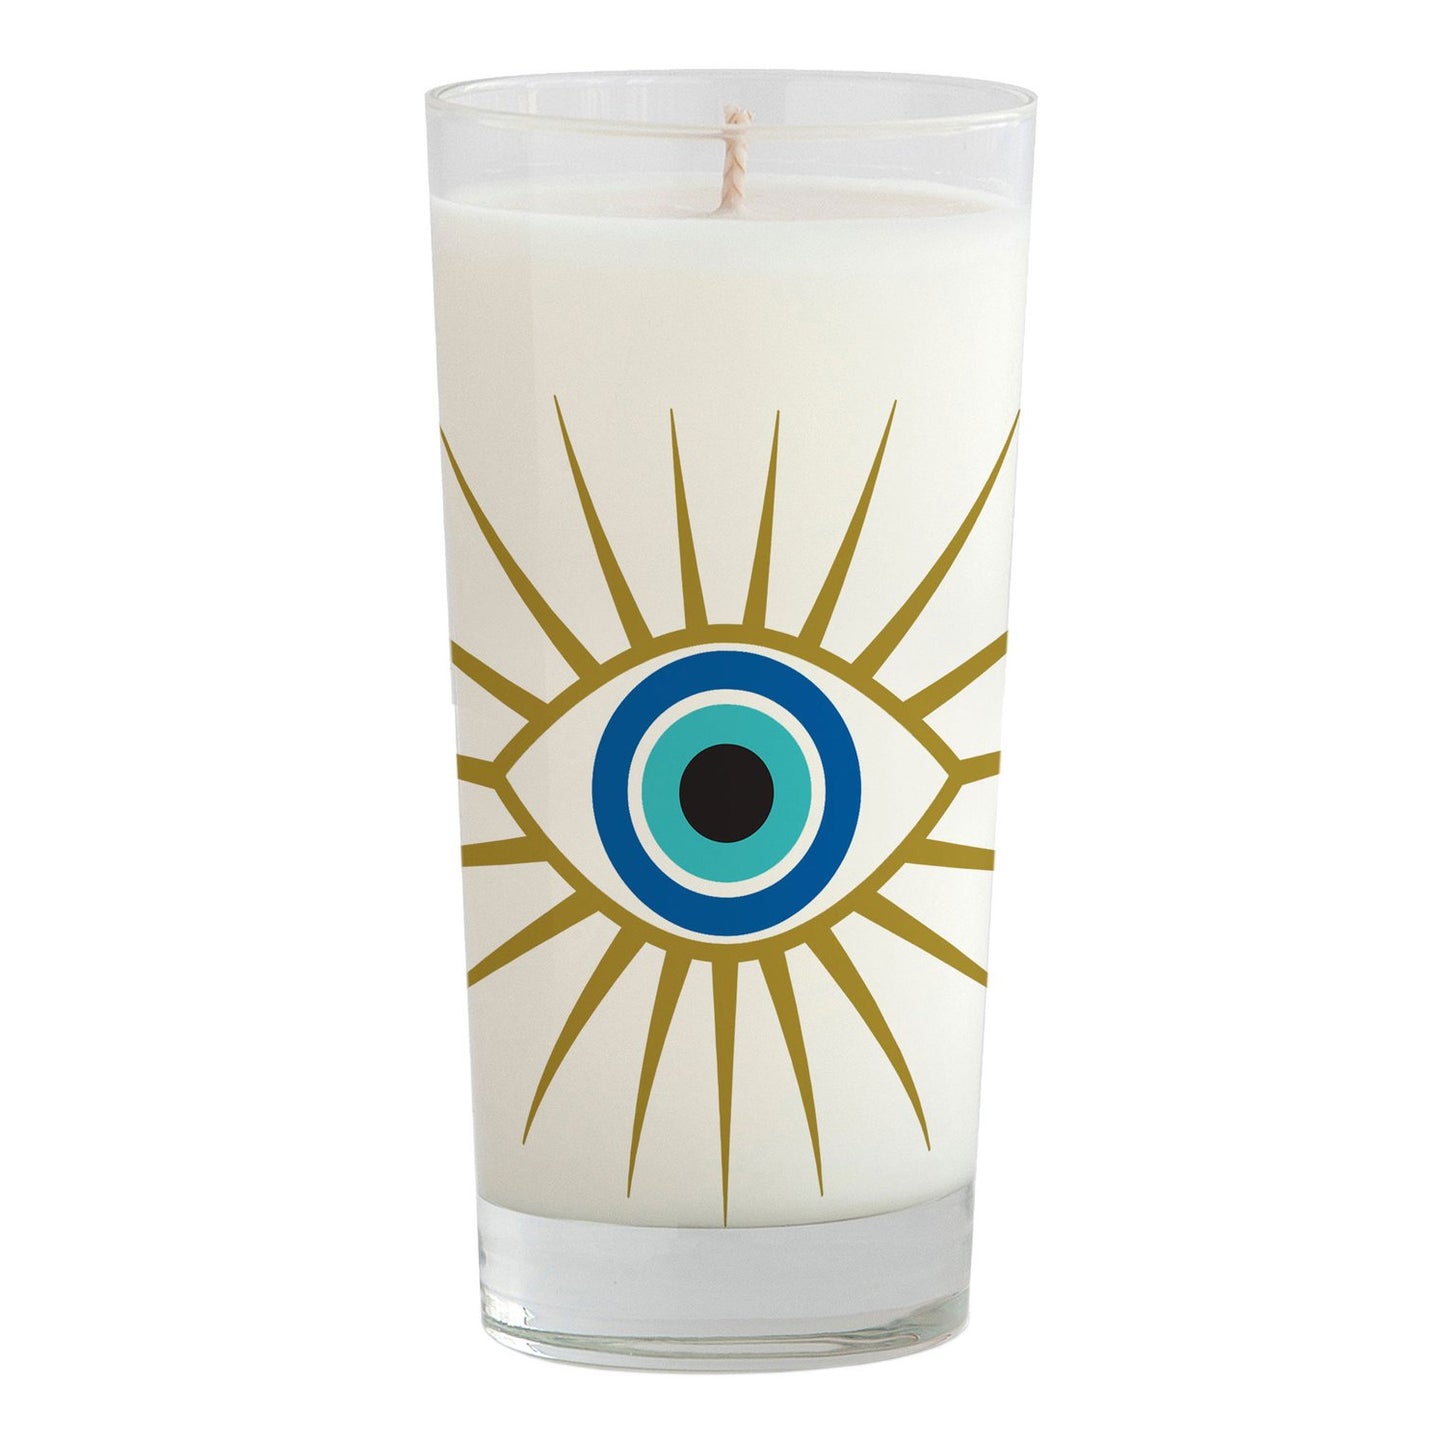 EVIL EYE DRINKING GLASS CANDLE